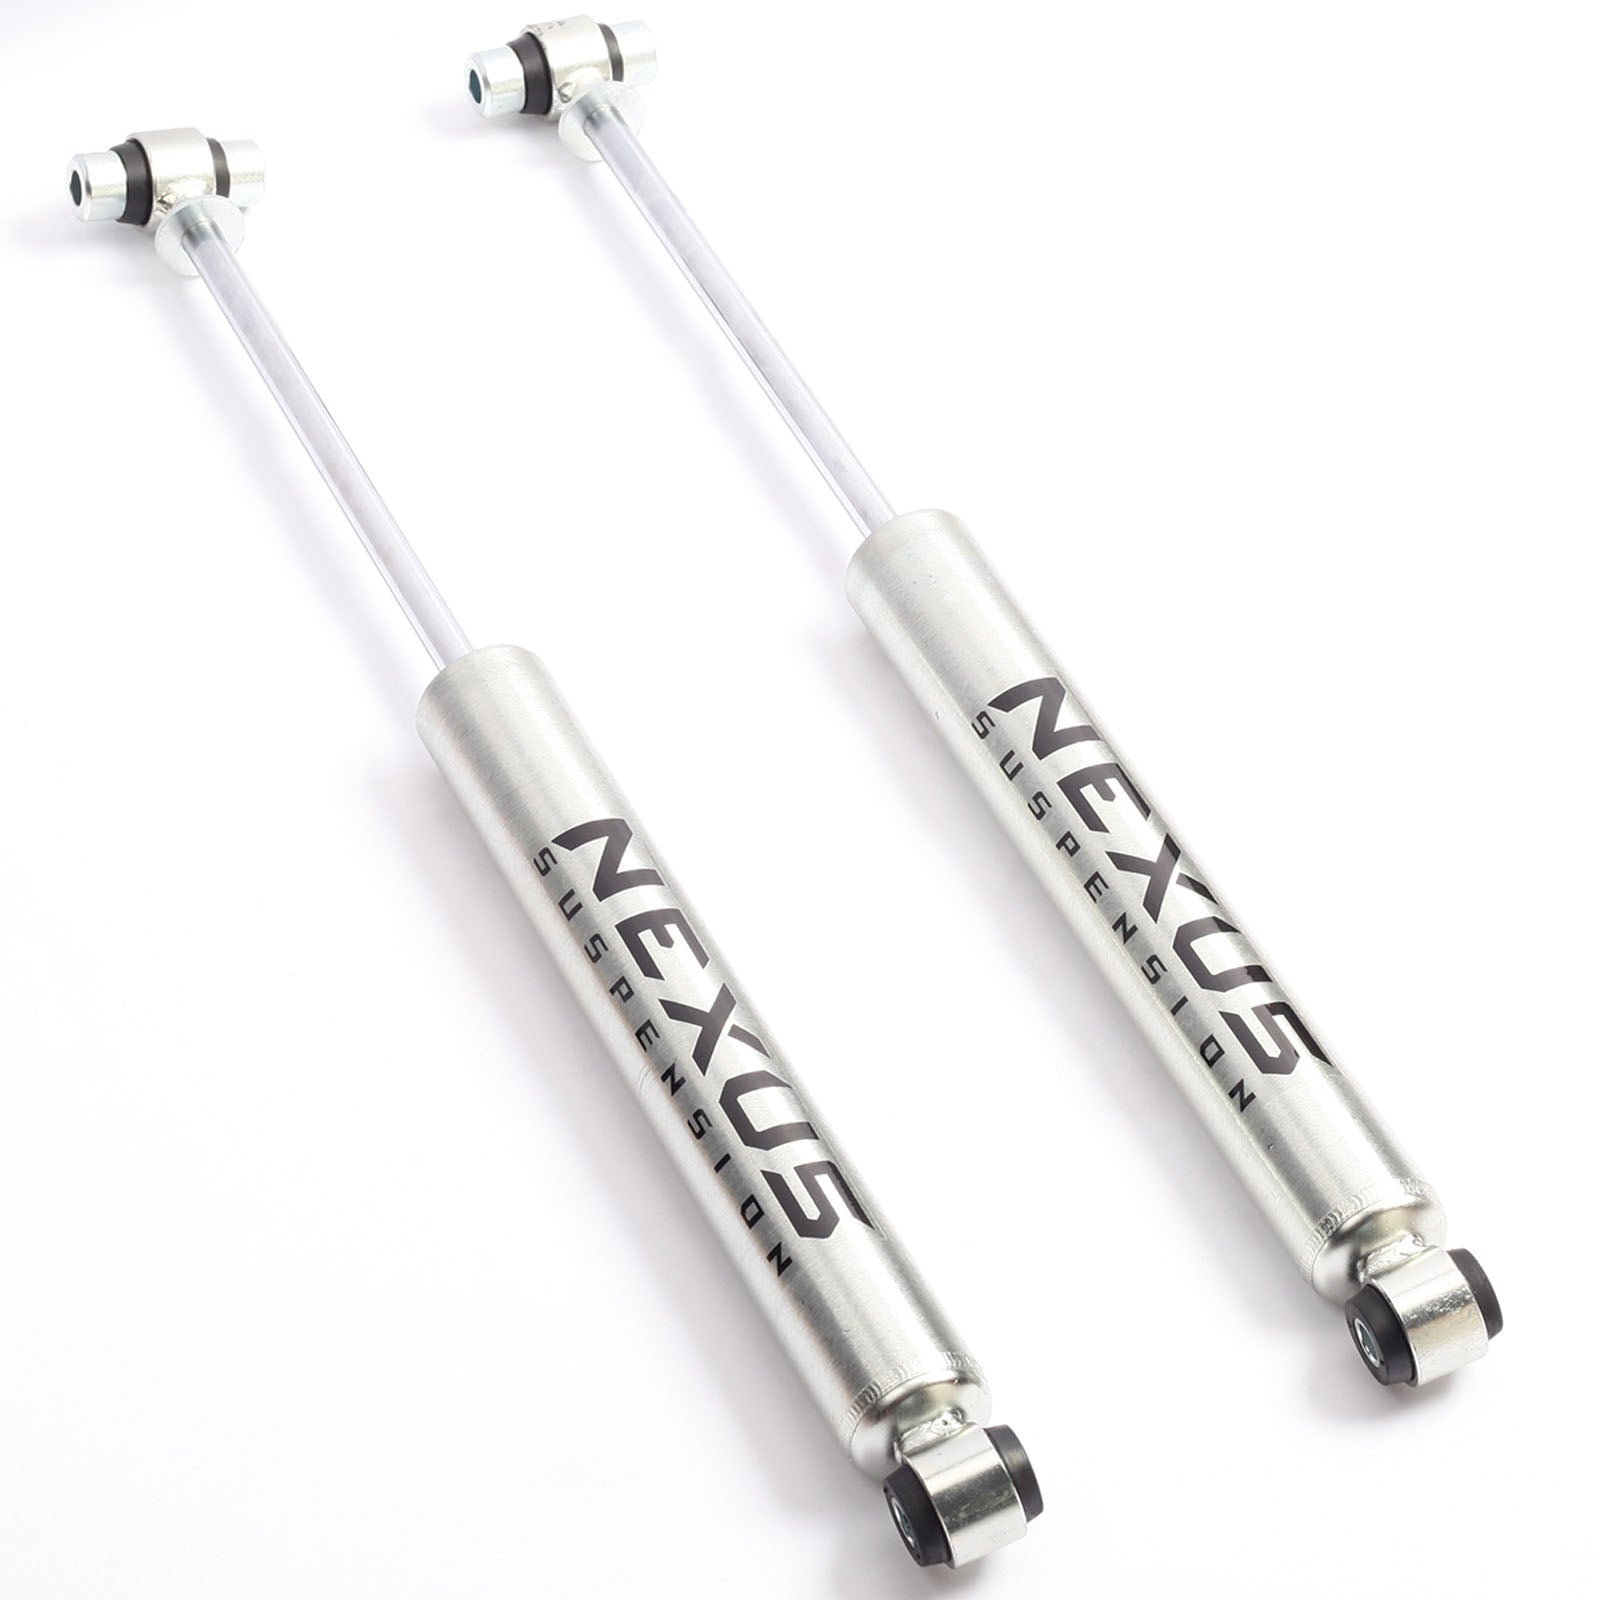 NEXUS SUSPENSION 2-3 Inch Lift Rear Shock Absorber for 1999-2006 Chevy Silverado 1500 2wd GMC Sierra 1500 2wd,Zinc Plated Coating,Pair Pack